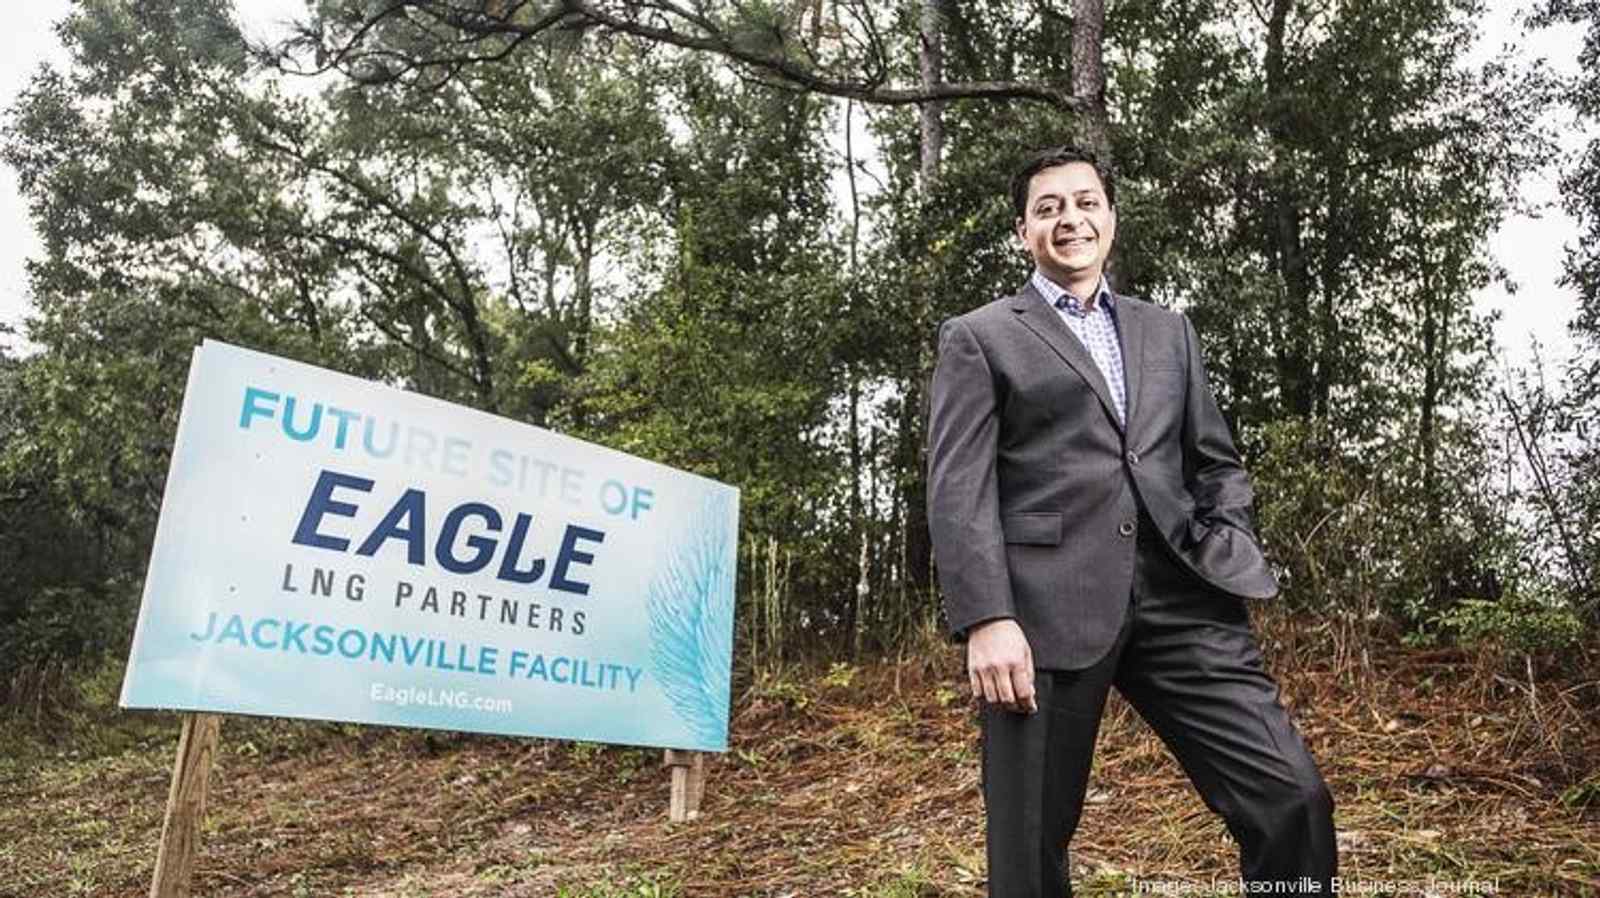 Why this energy company is investing many millions of dollars on two Jacksonville locations